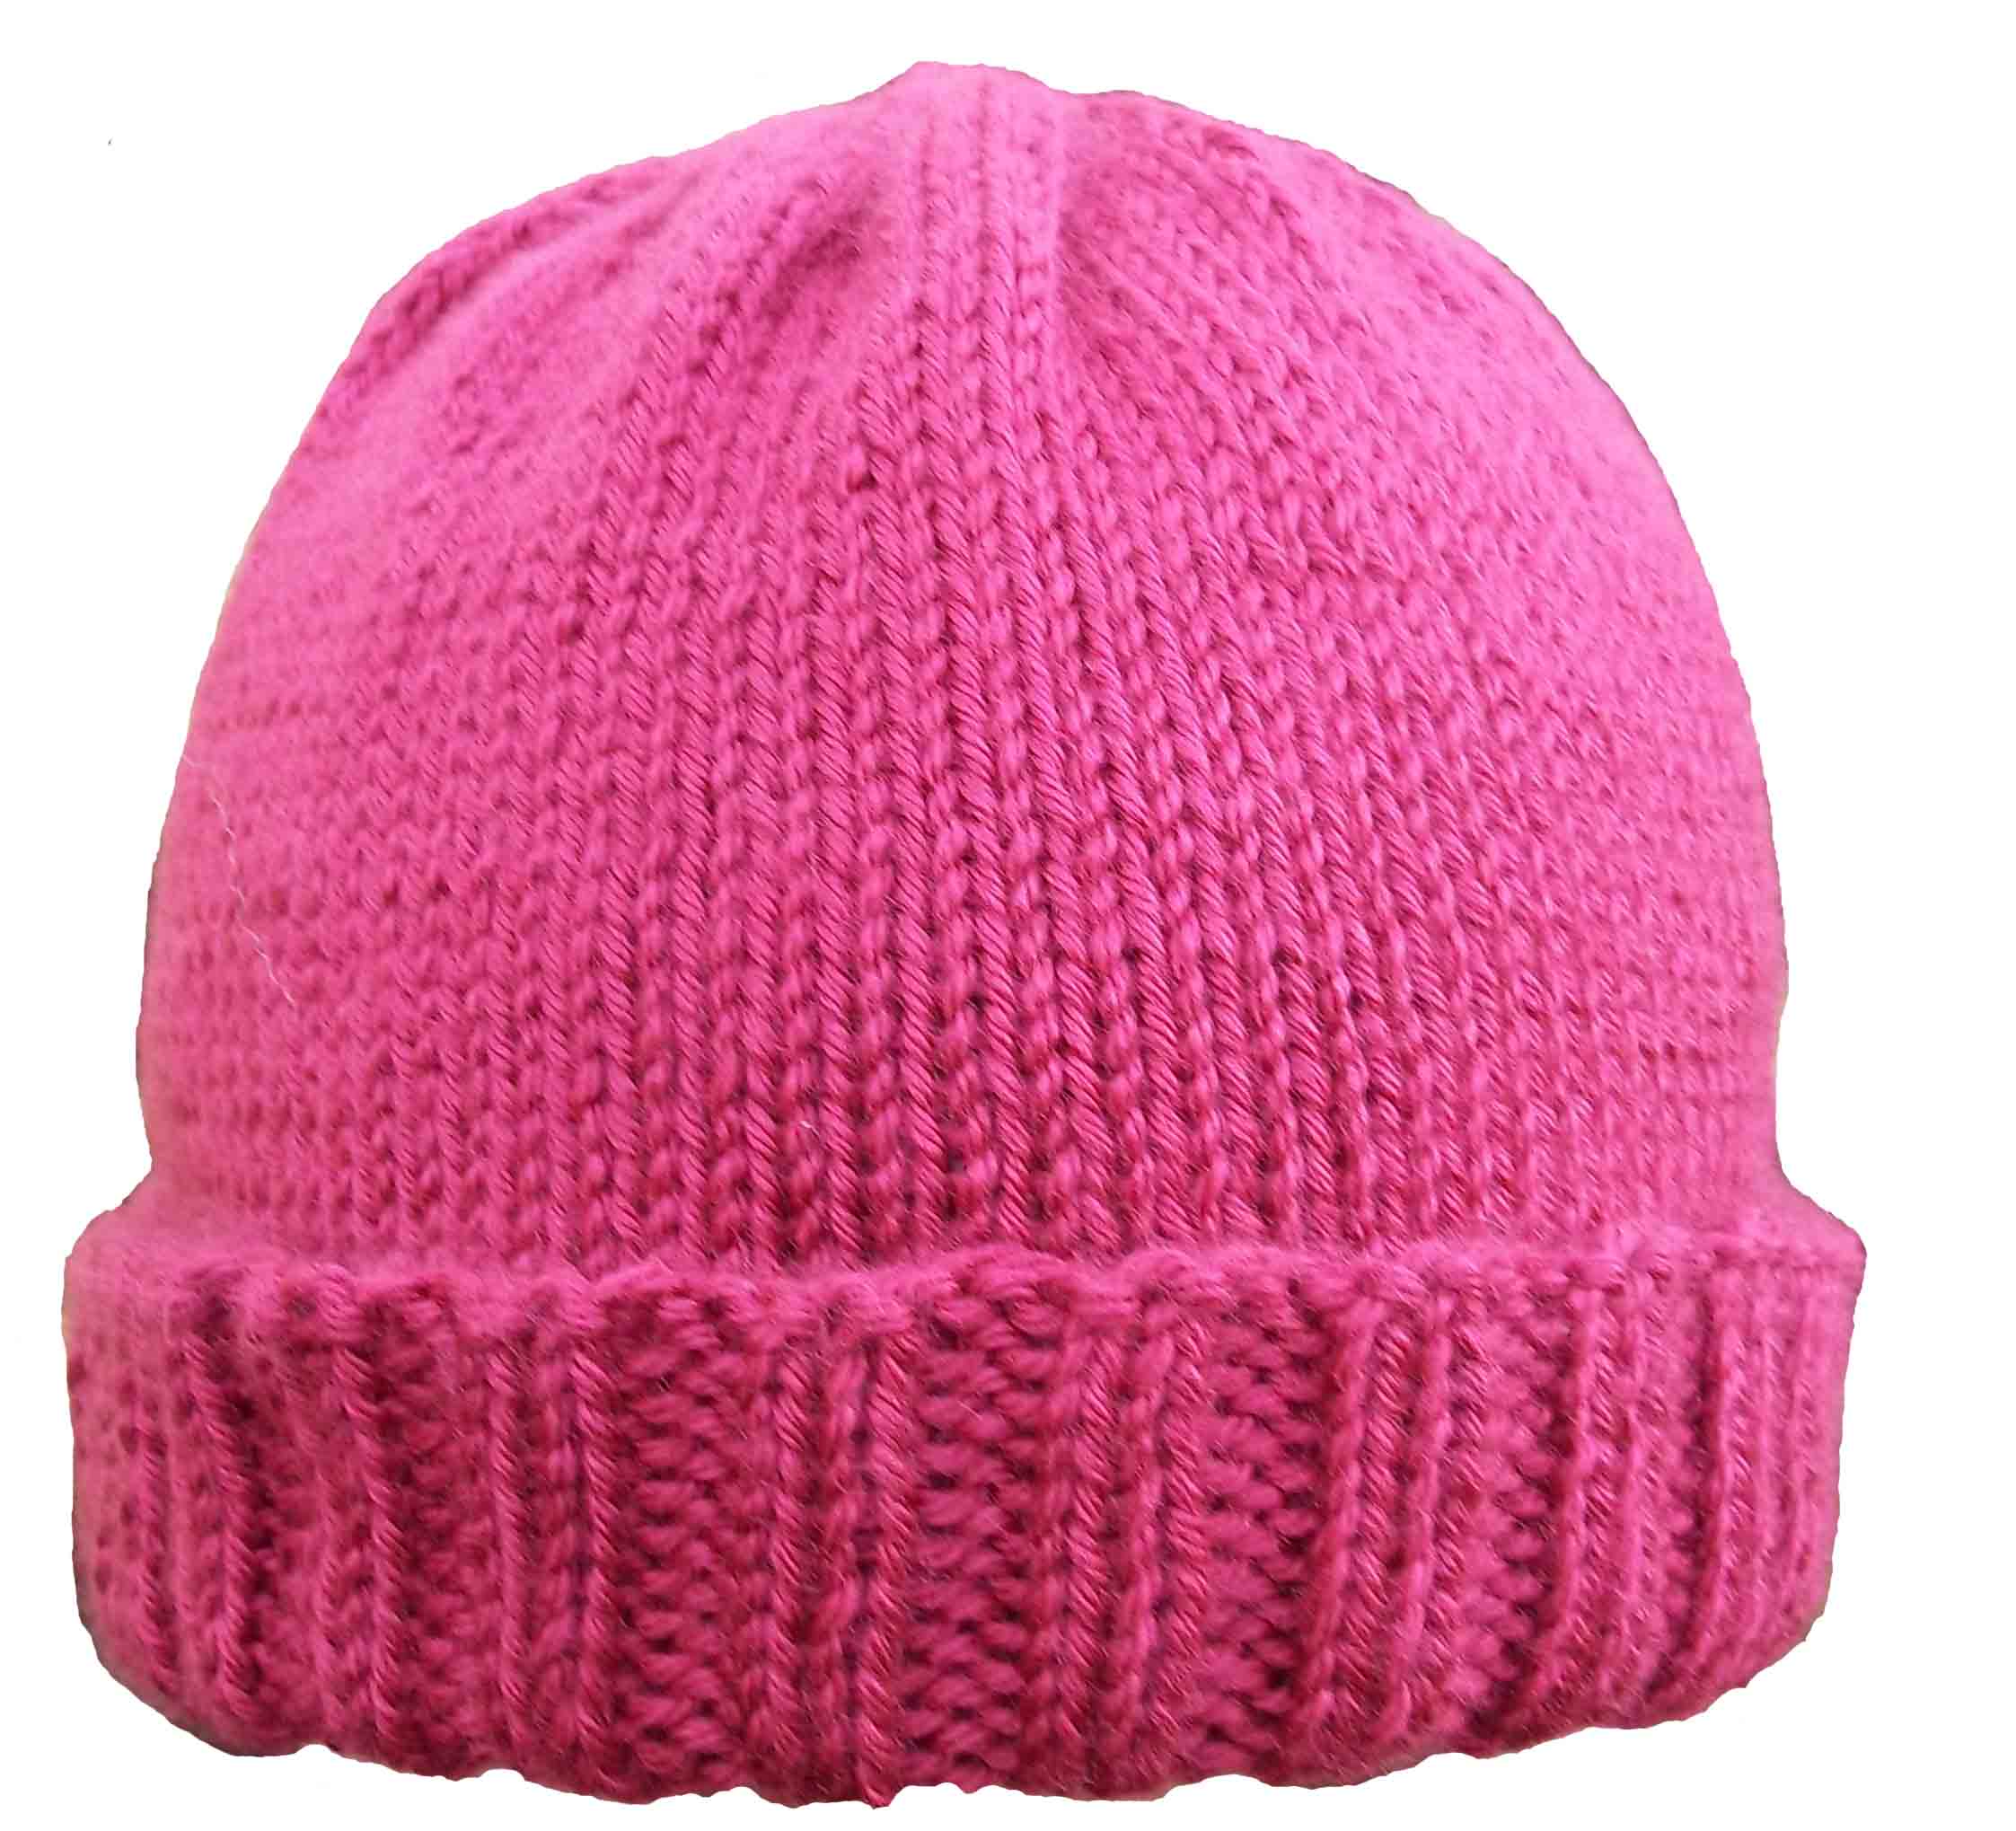 ribbed-brim-hat-pattern-kniftybits-s-blog